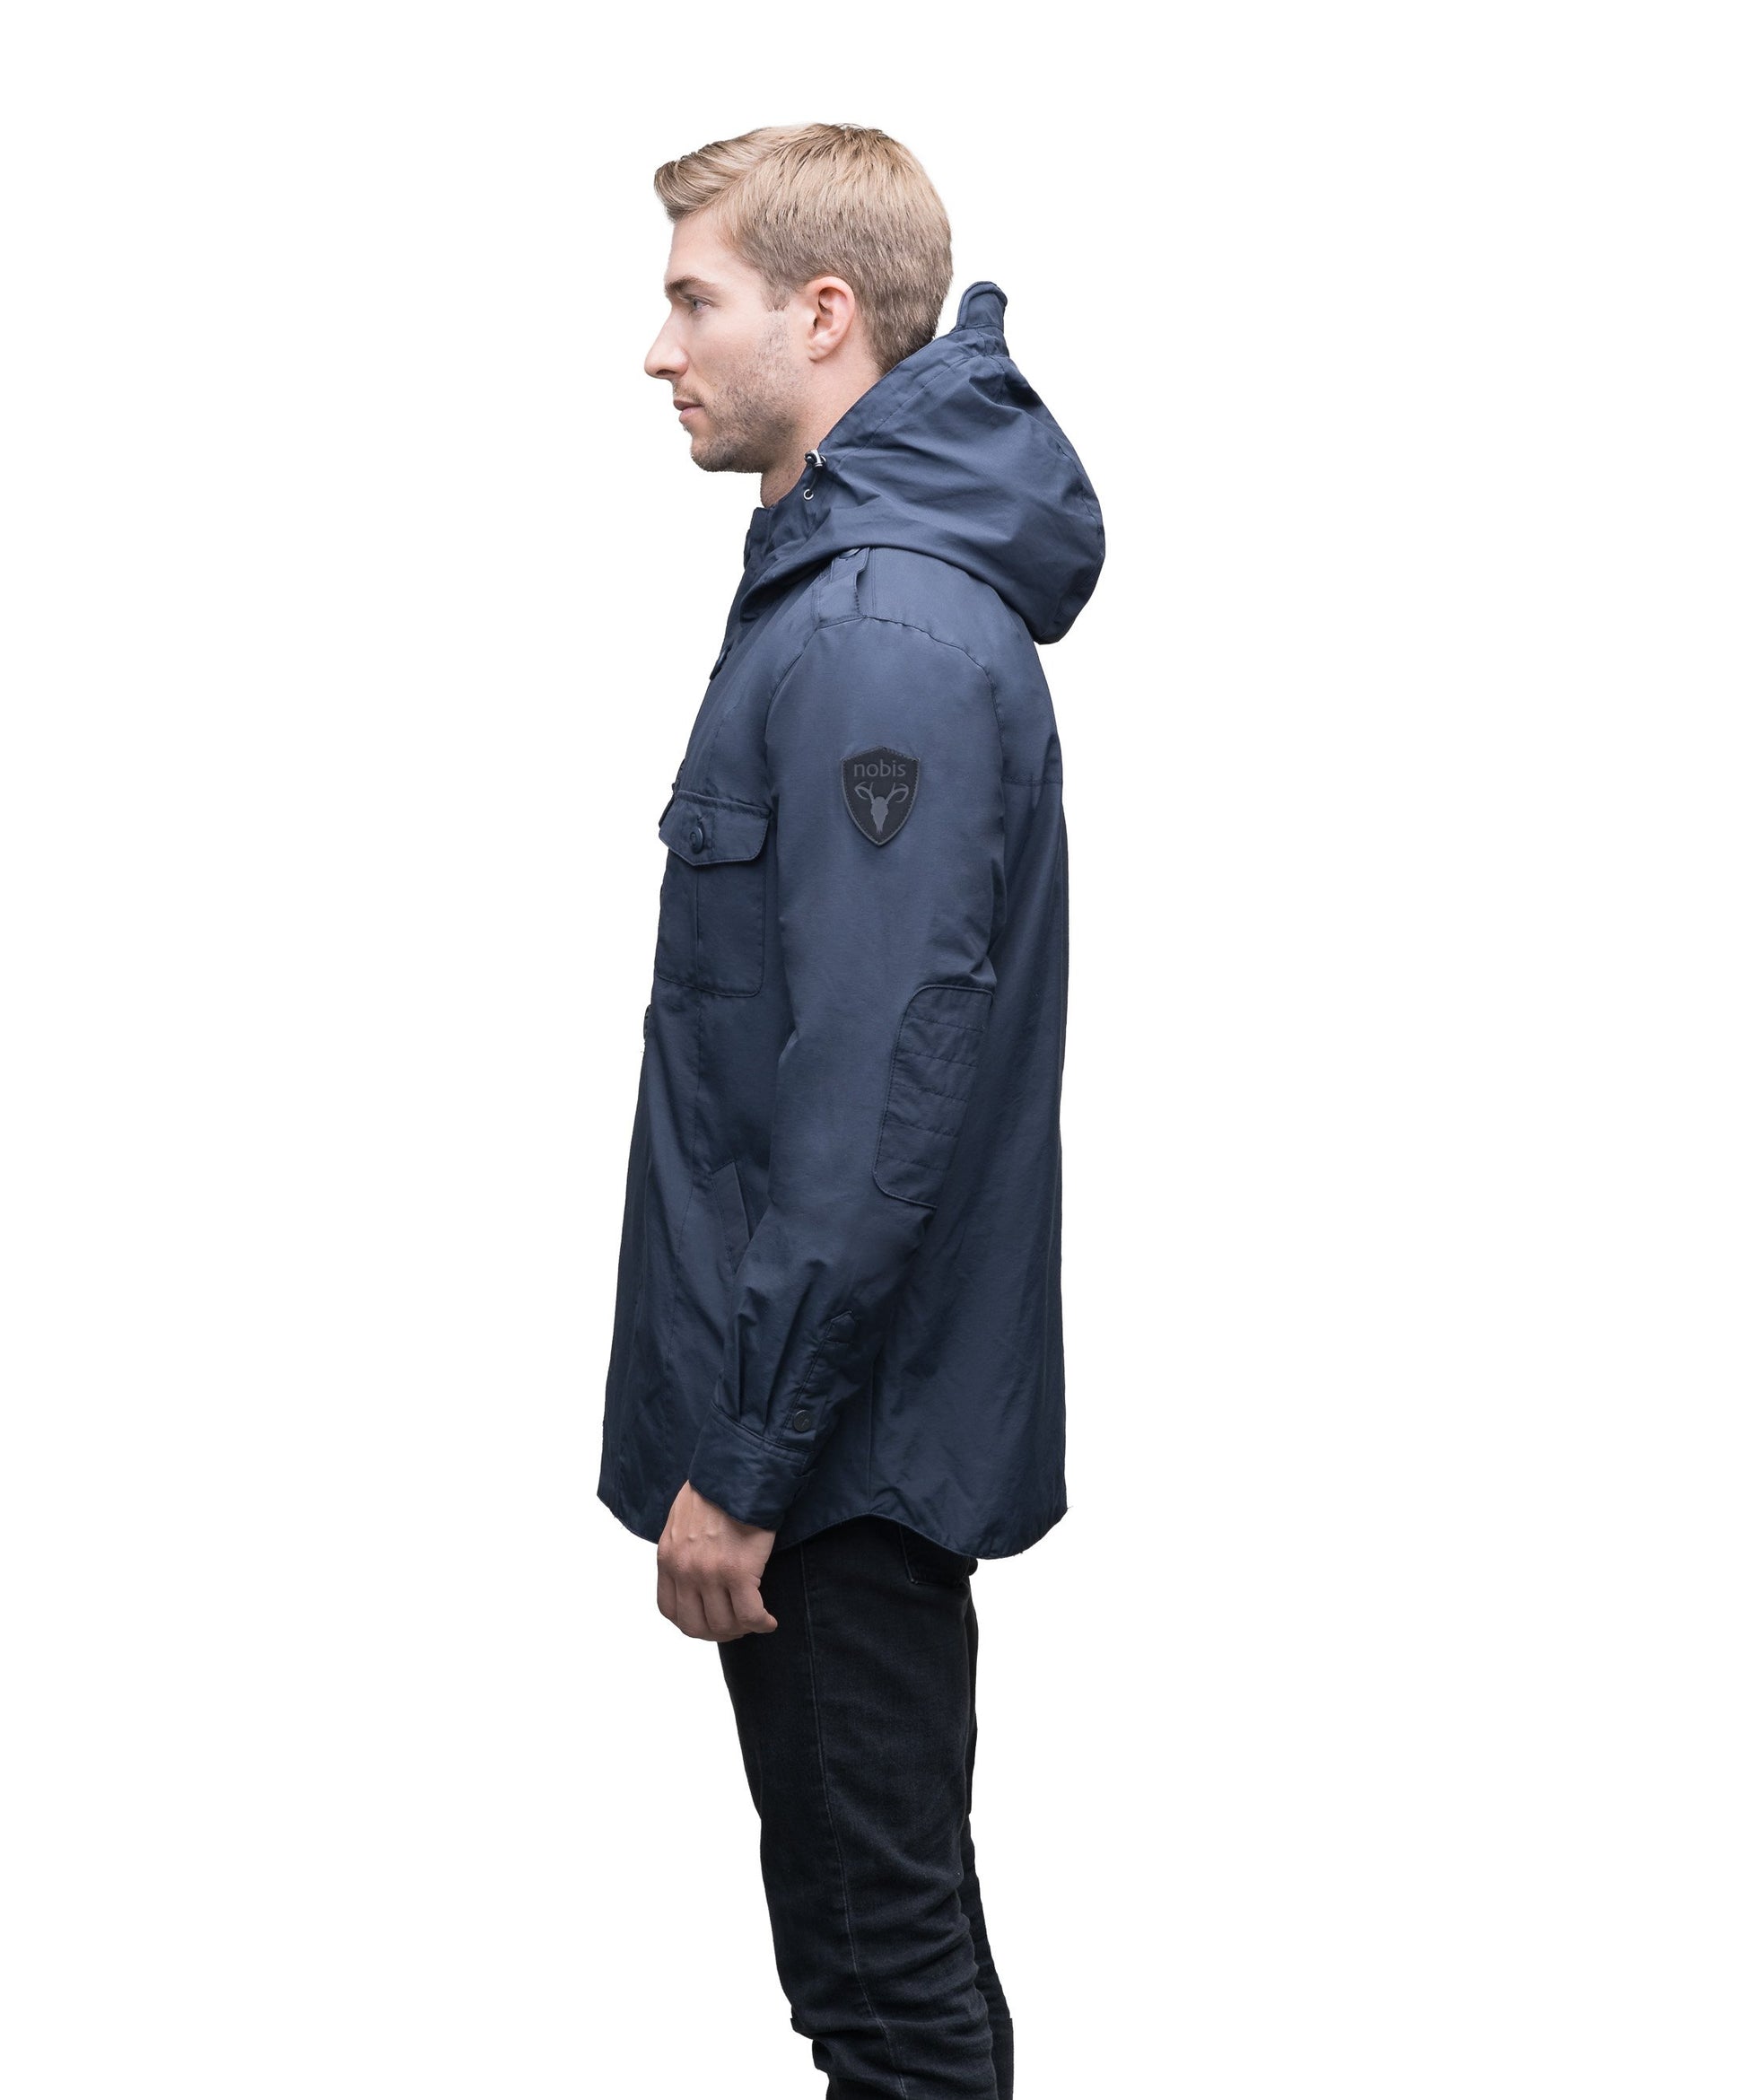 Men's hooded shirt jacket with patch chest pockets in Navy